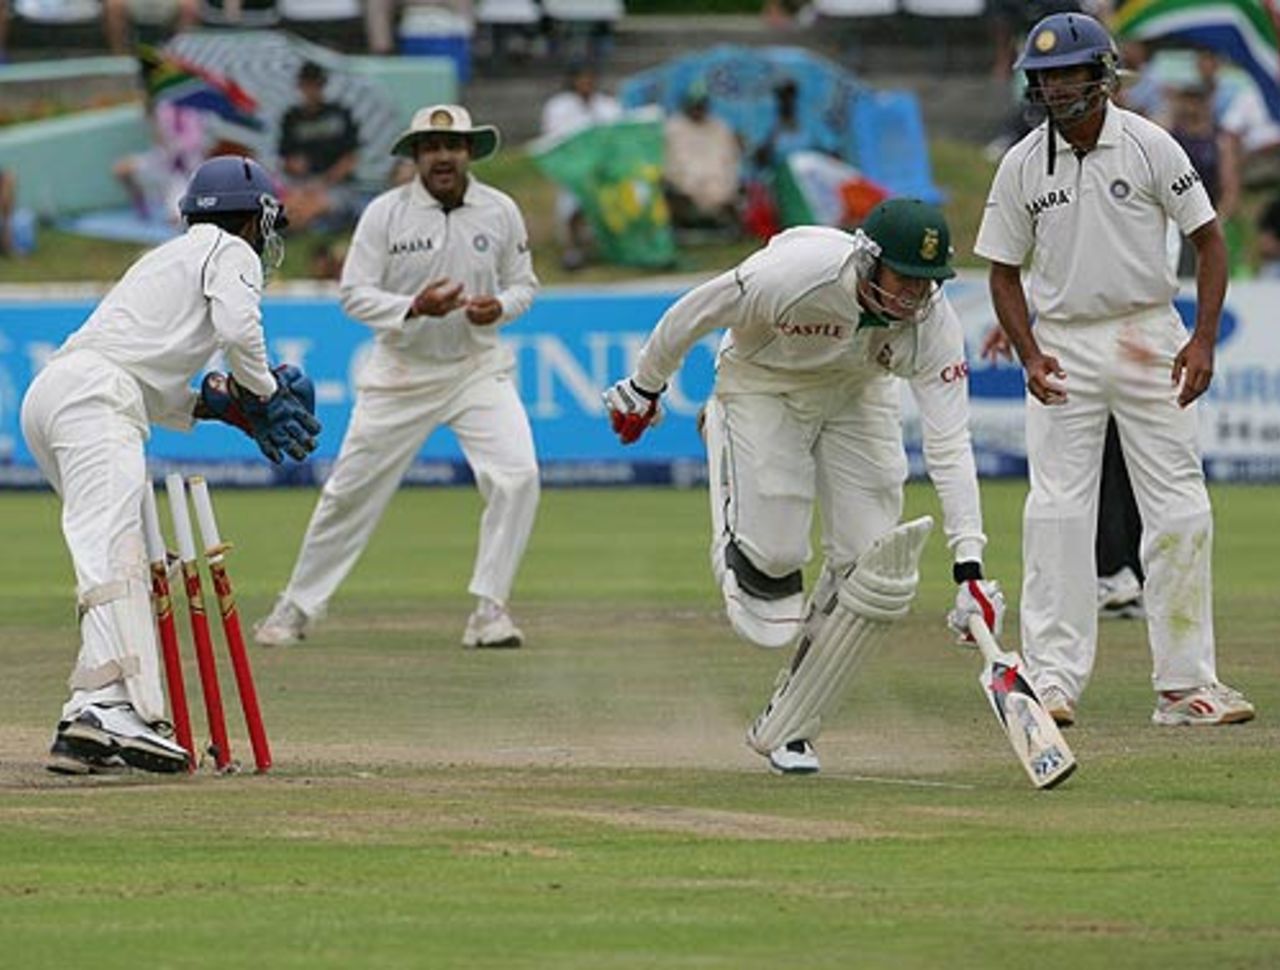 Dinesh Karthik unsuccessfully attempts to run-out Shaun Pollock, South Africa v India, 3rd Test, Cape Town, 5th day, January 6, 2007